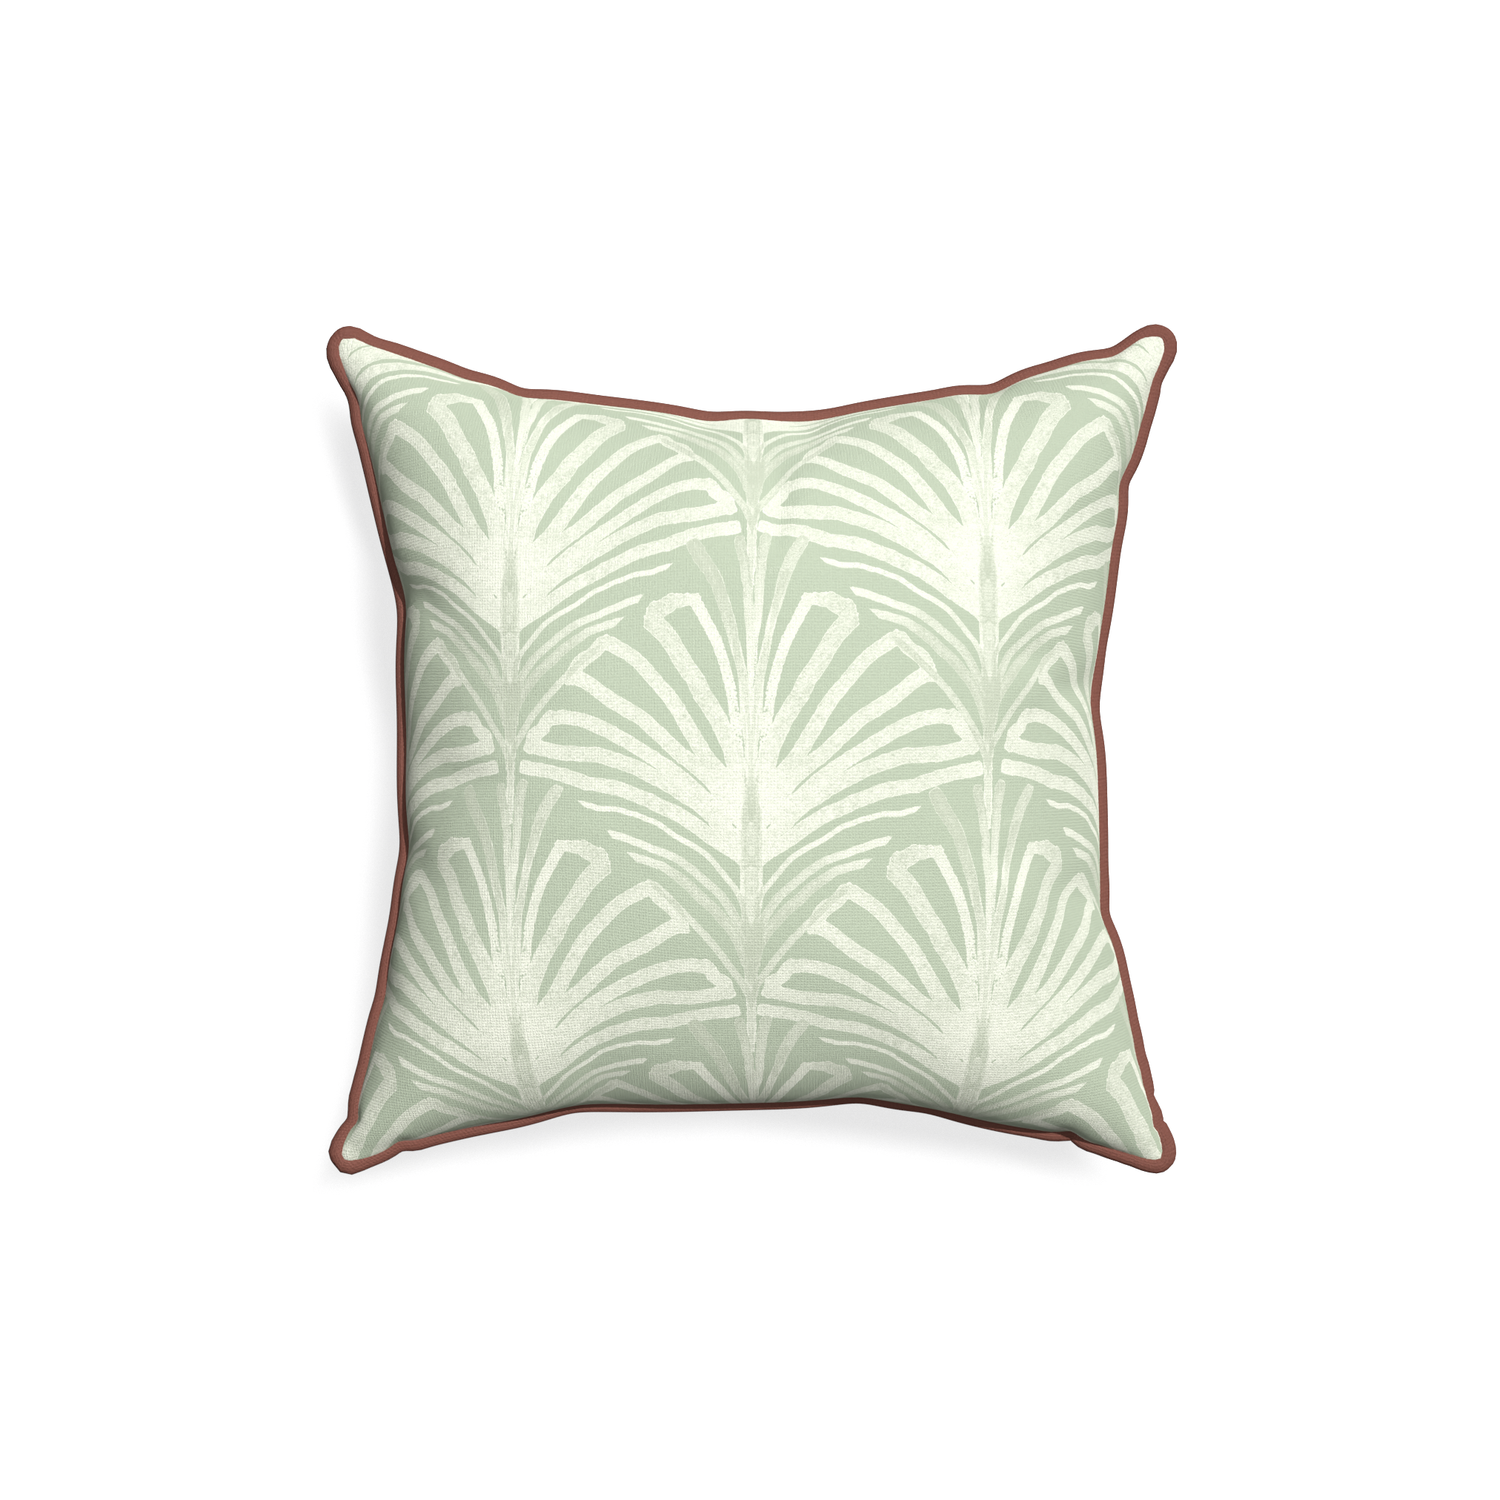 18-square suzy sage custom pillow with w piping on white background